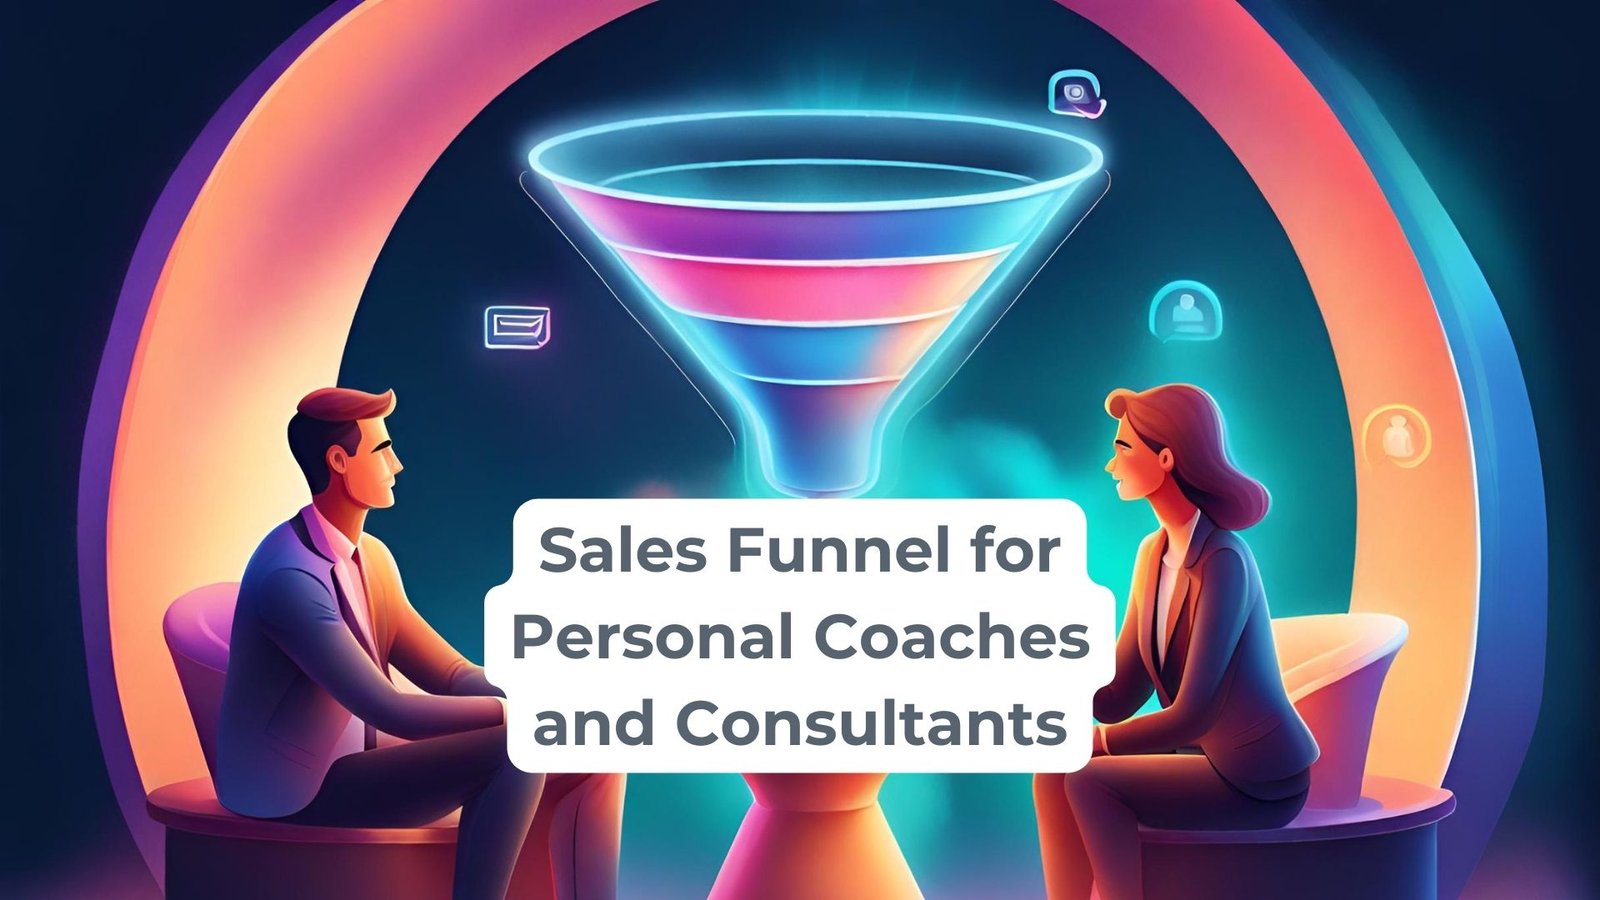 Sales Funnel for Personal Coaches and Consultants